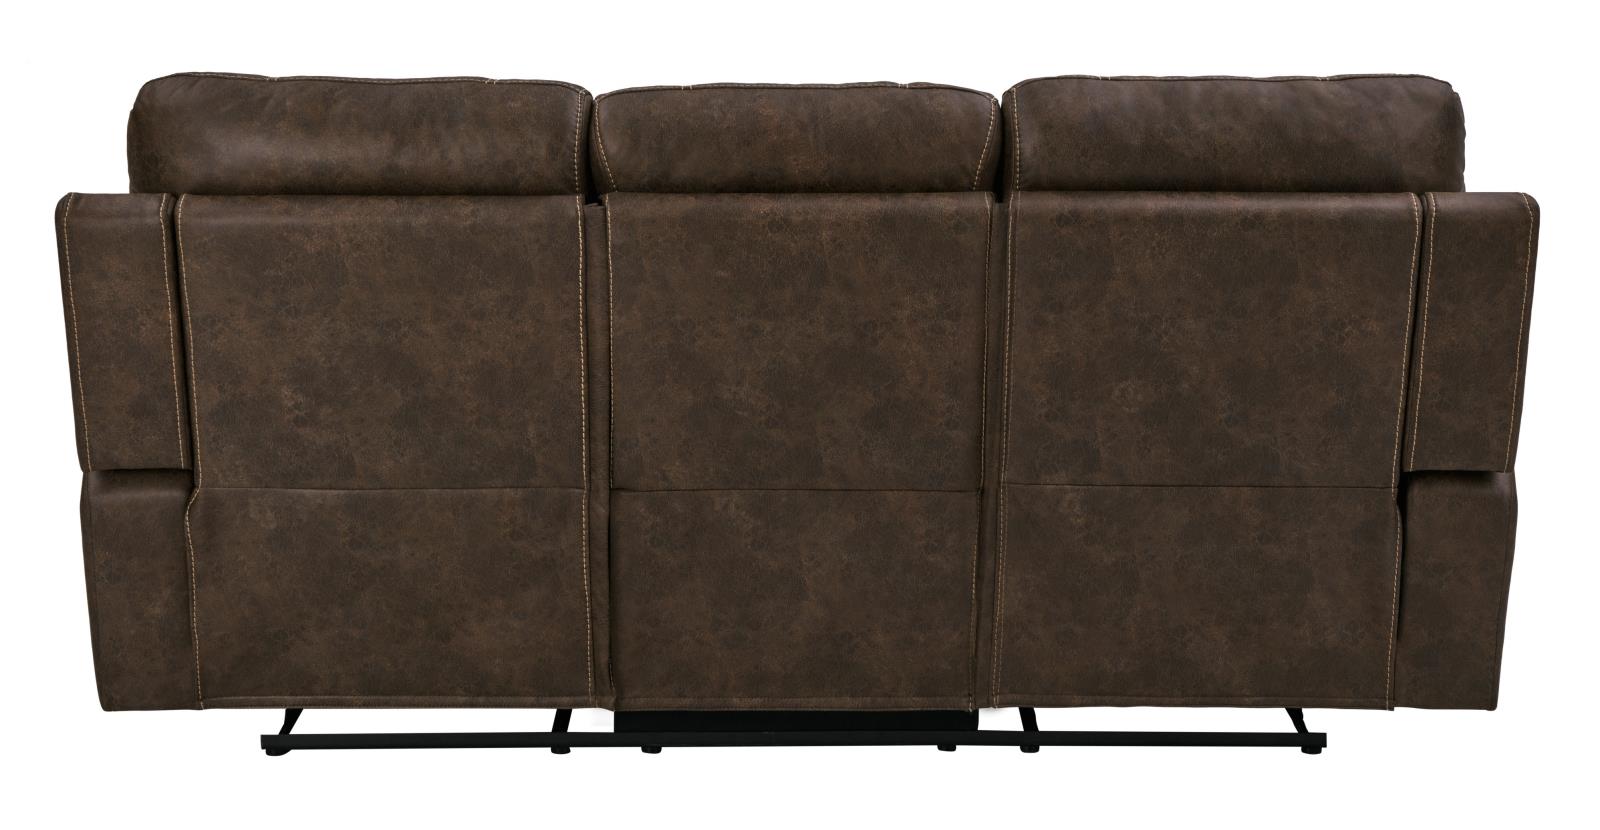 Brixton Upholstered Motion Sofa with Cup Holders Buckskin Brown - What A Room